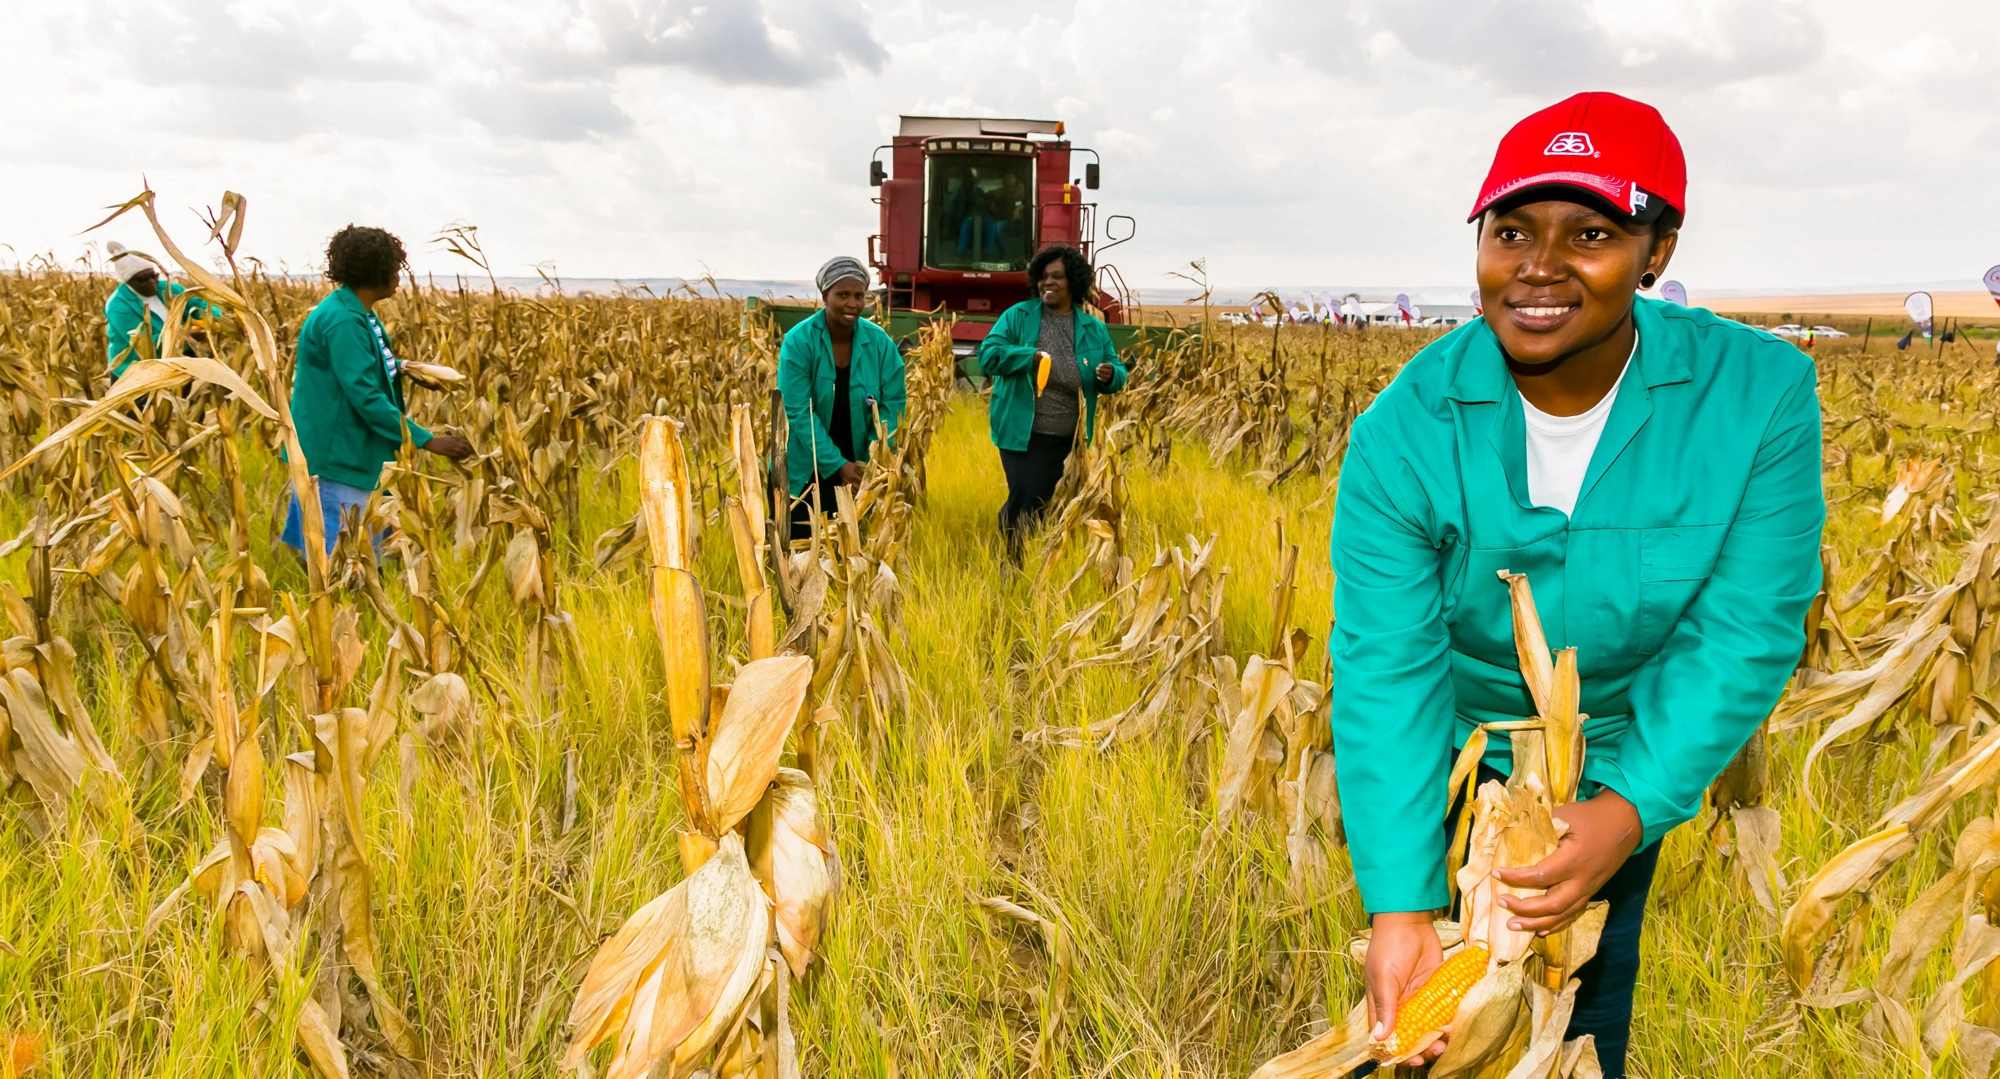 Commercial Maize Farming in South Africa. Credit: By Sunshine Seeds/Shutterstock